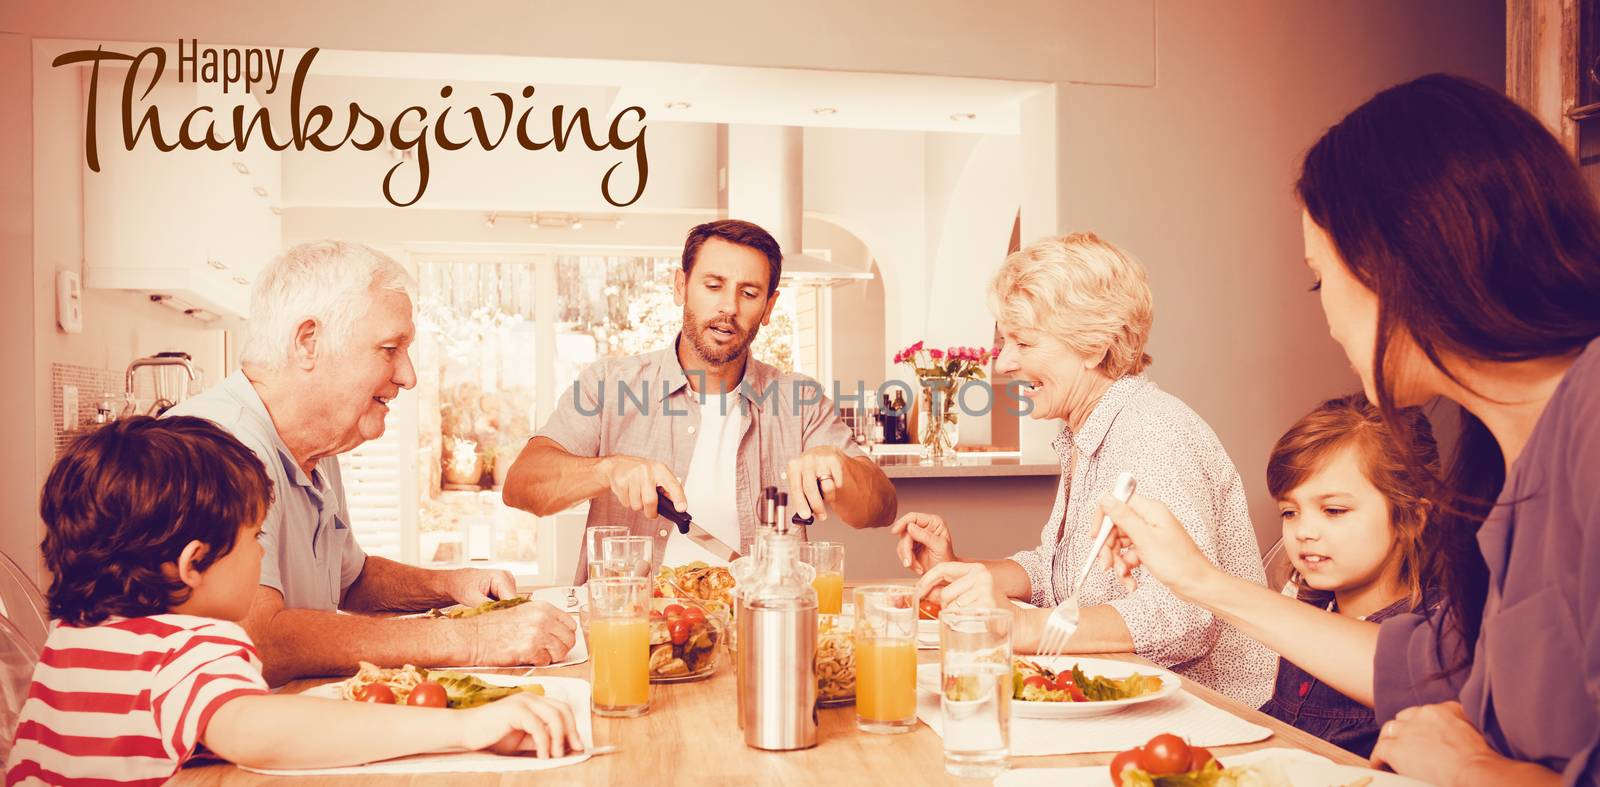 Composite image of illustration of happy thanksgiving day text greeting by Wavebreakmedia